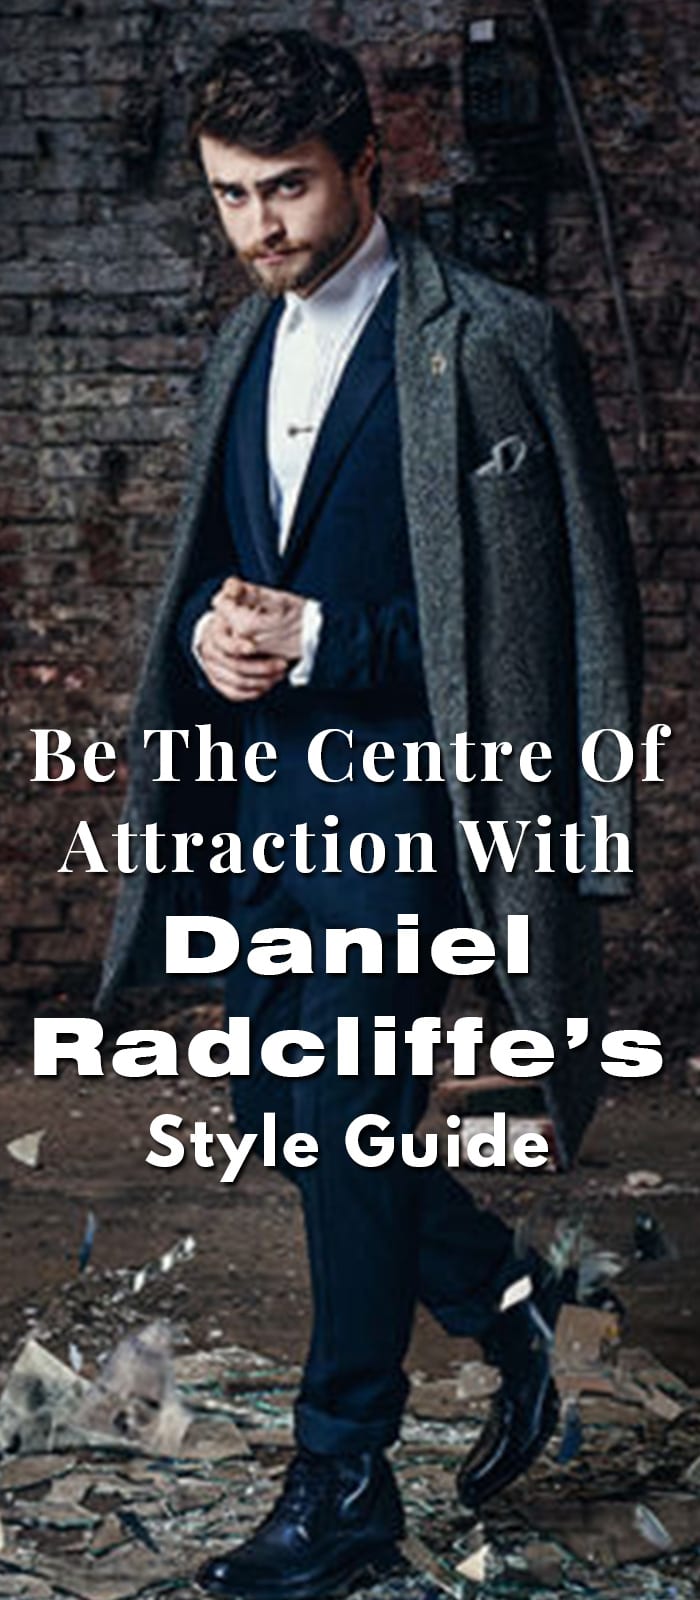 Be The Centre Of Attraction With Daniel Radcliffe’s Style Guide